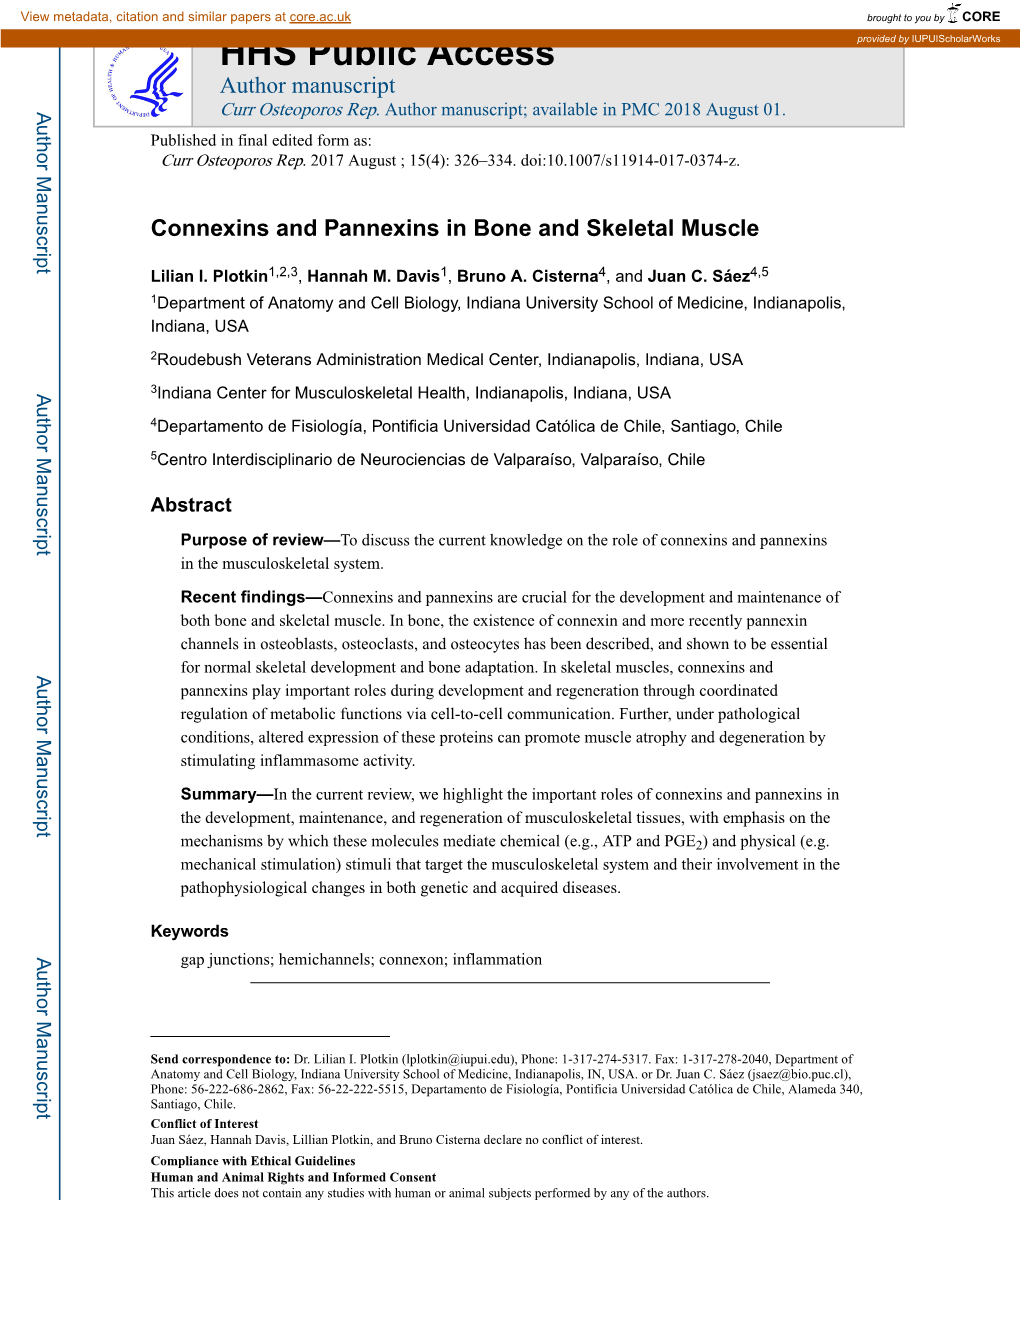 Connexins and Pannexins in Bone and Skeletal Muscle